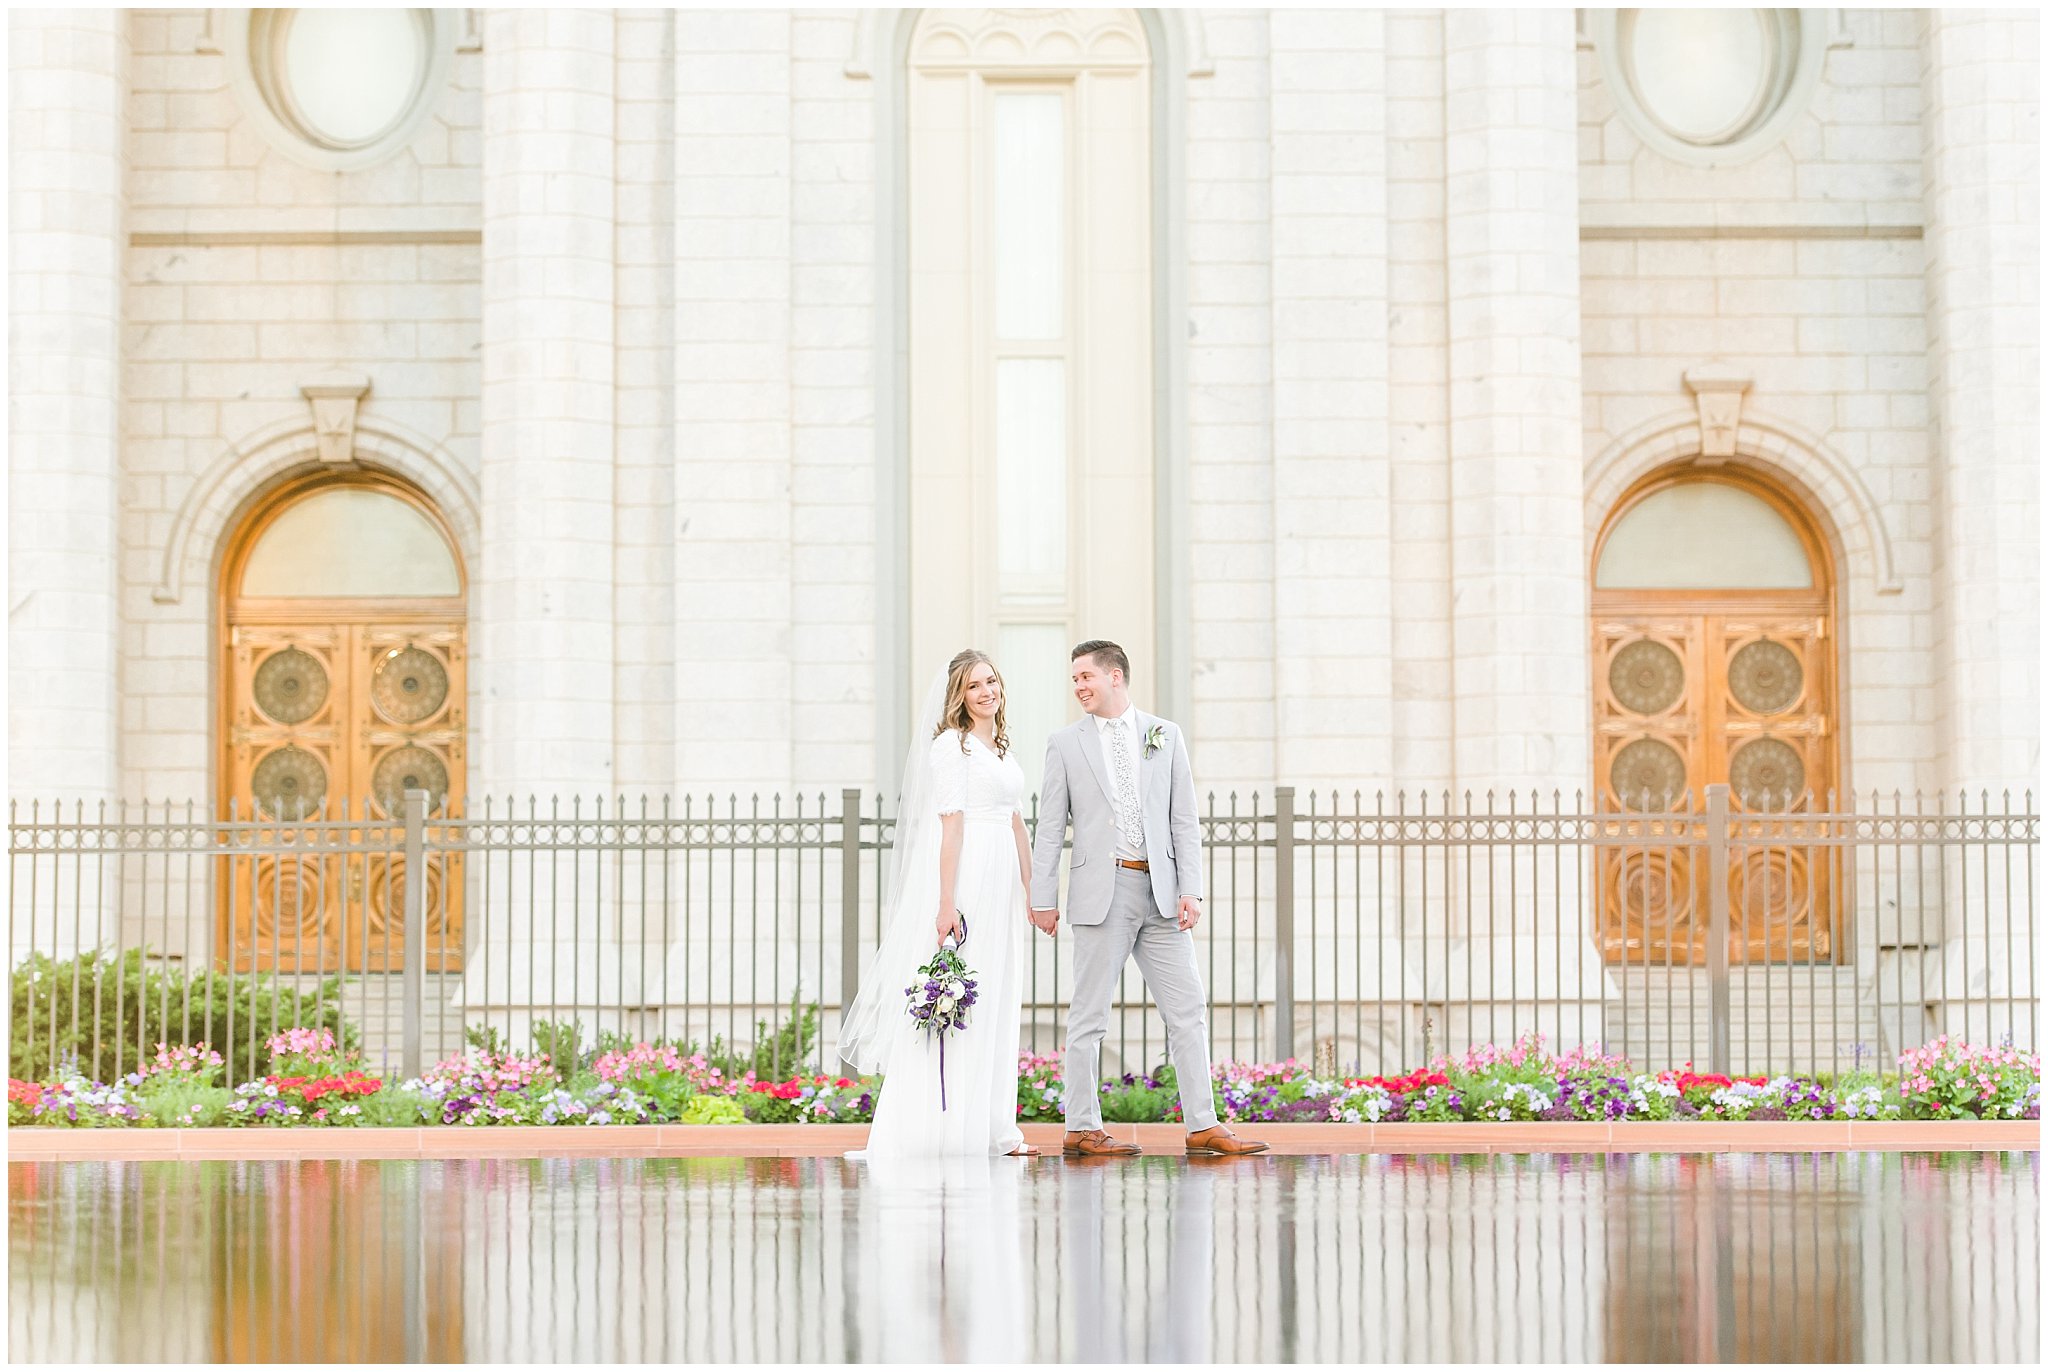 Bride in simple elegant dress with lavender bouquet and groom in grey suit with lavender floral tie | Salt Lake Temple Wedding | Utah Wedding Photographers | Jessie and Dallin Photography